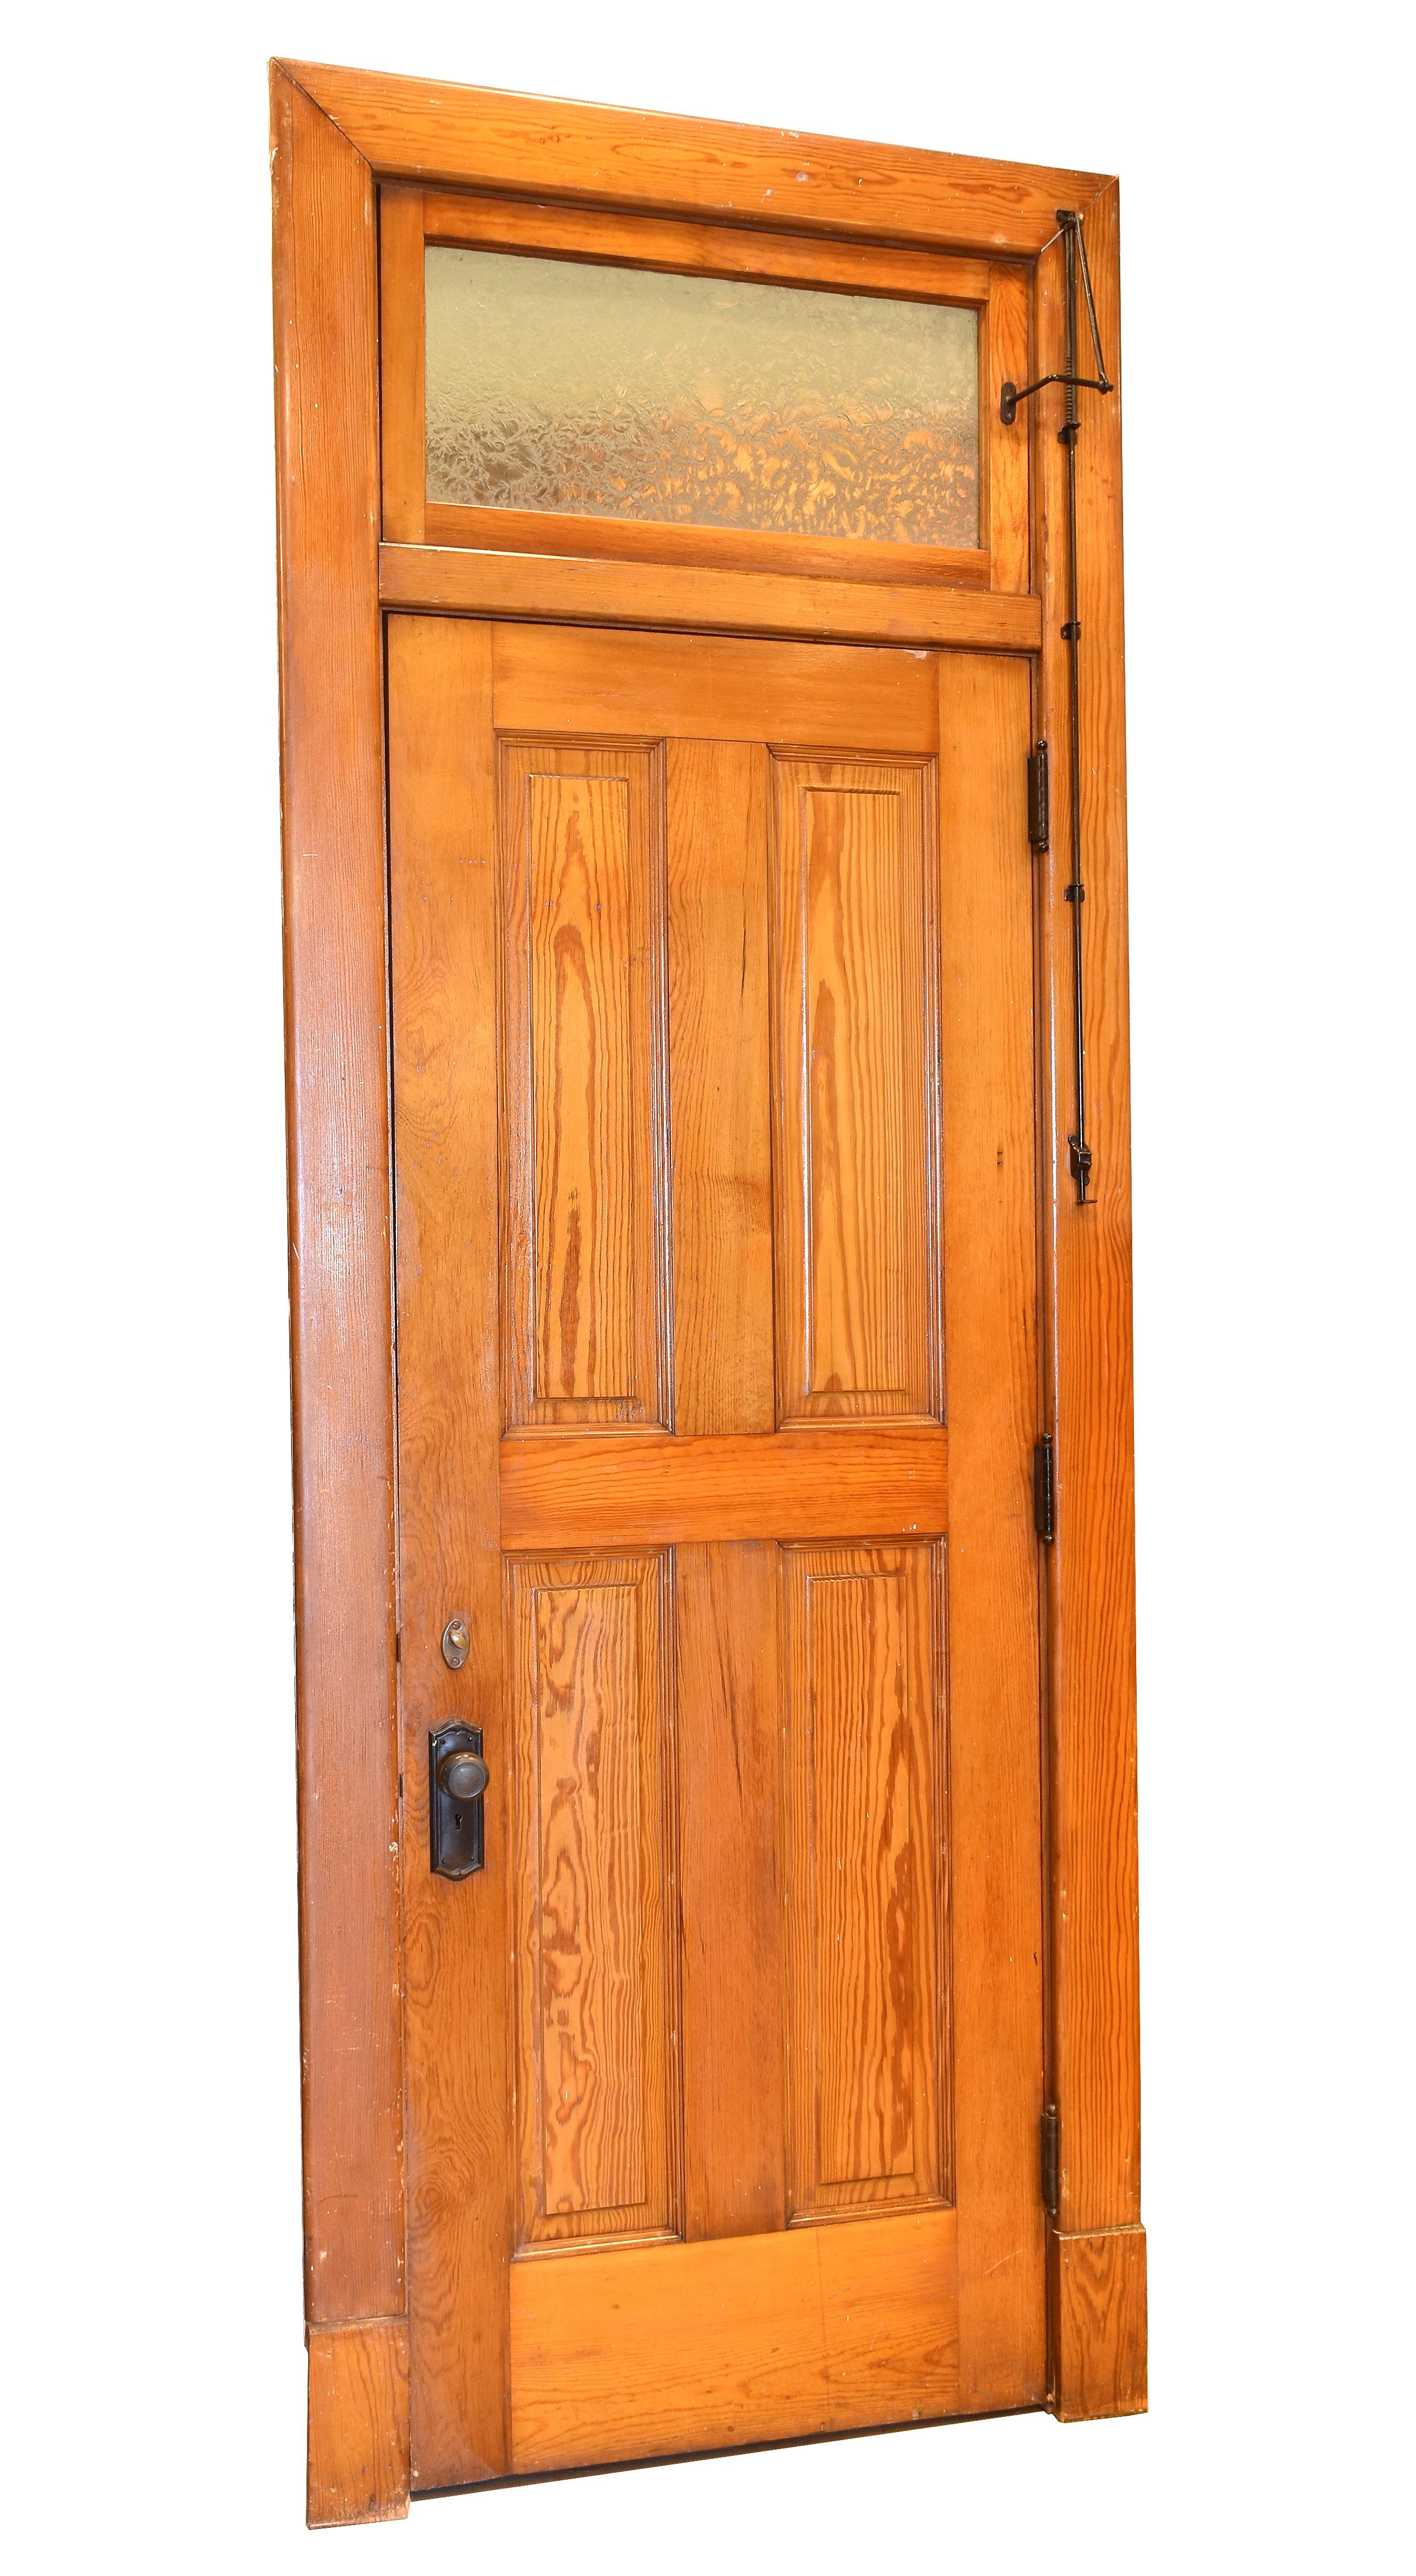 Early 20th Century Old Growth Douglas Fir 4 Panel Transom Door with Transom